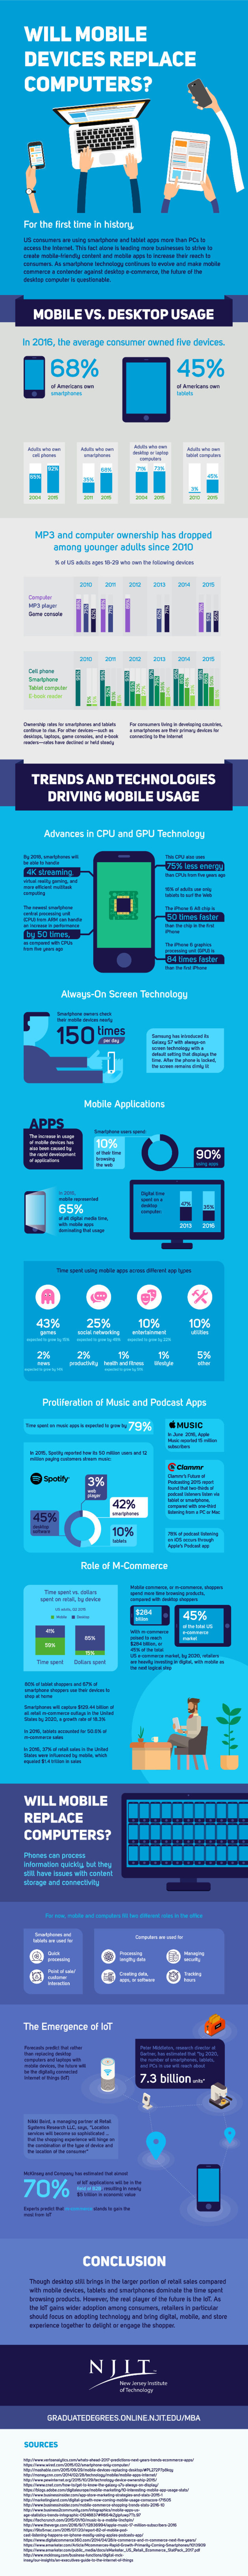 Will Mobile Devices Replace Desktop Computers? [Infographic] - MarketingProfs | The MarTech Digest | Scoop.it